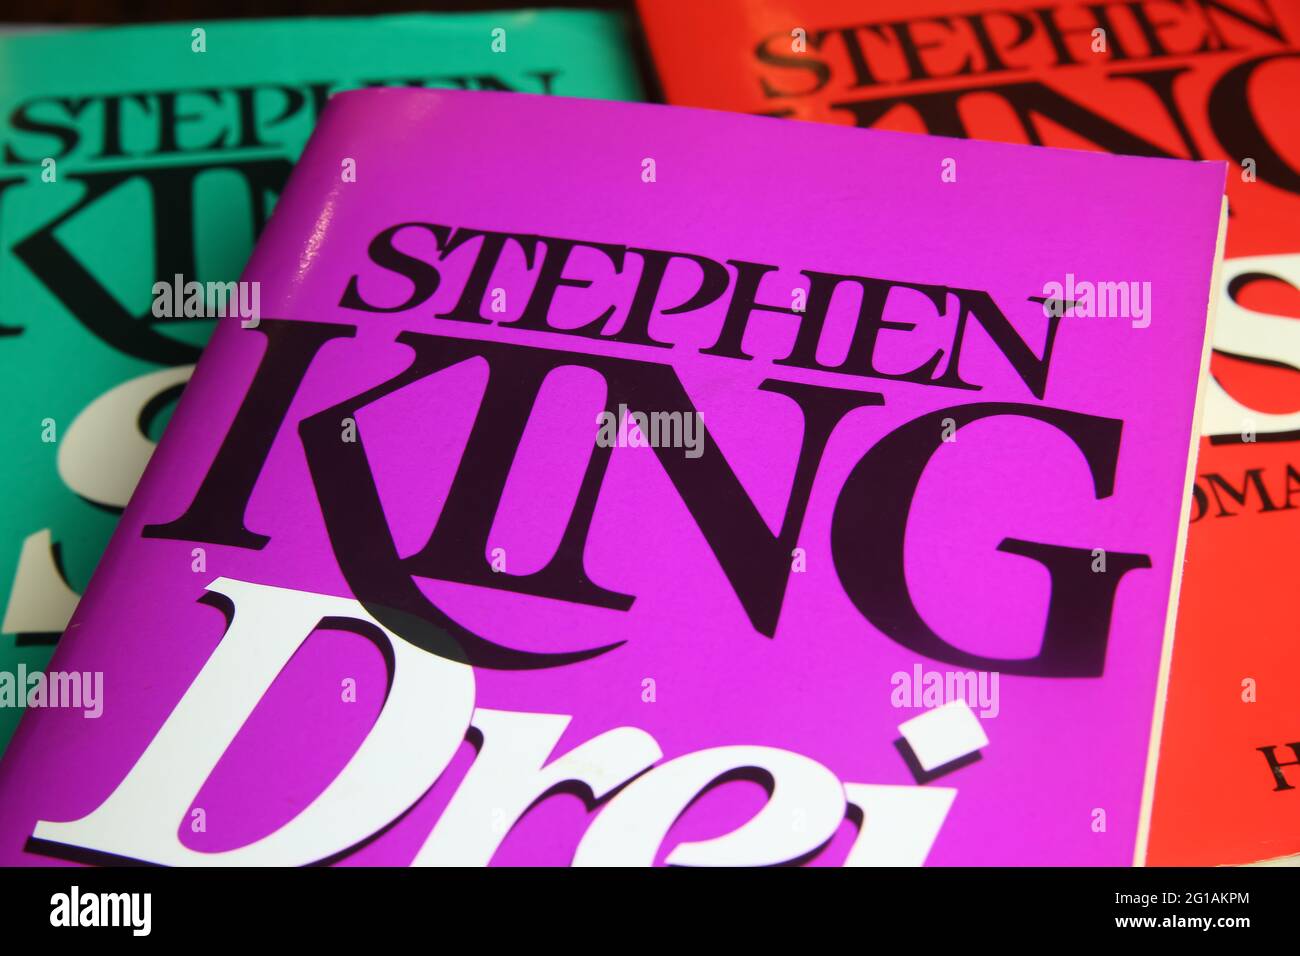 Viersen Germany May 9 21 Closeup Of Isolated Stephen King Novel Books Focus On Big Letter N In Center Stock Photo Alamy